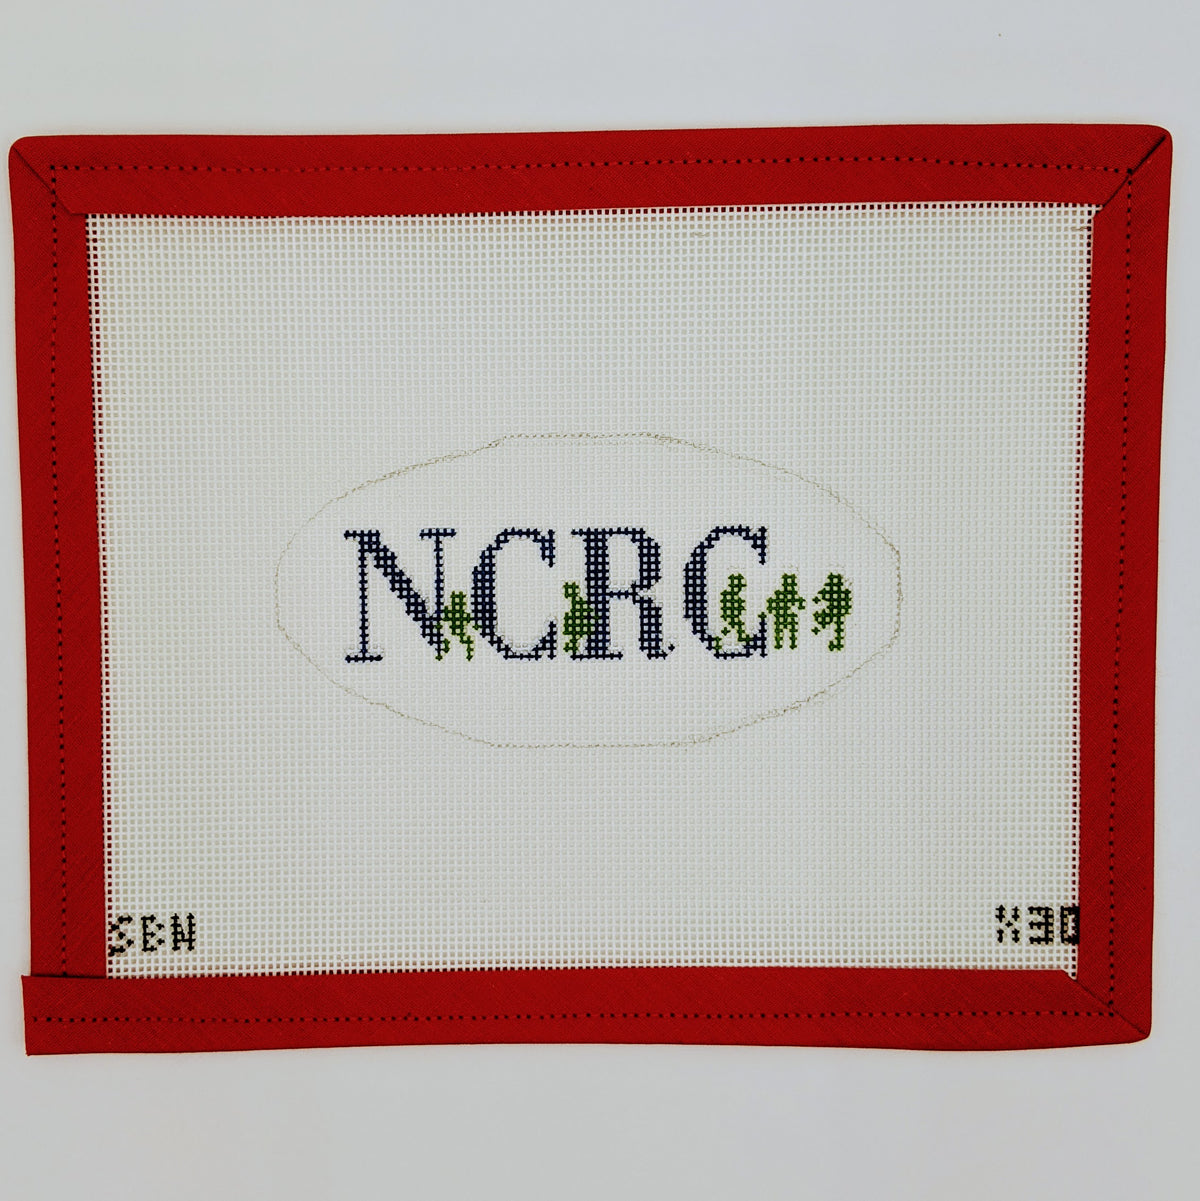 National Child Research Center (NCRC) Ornament